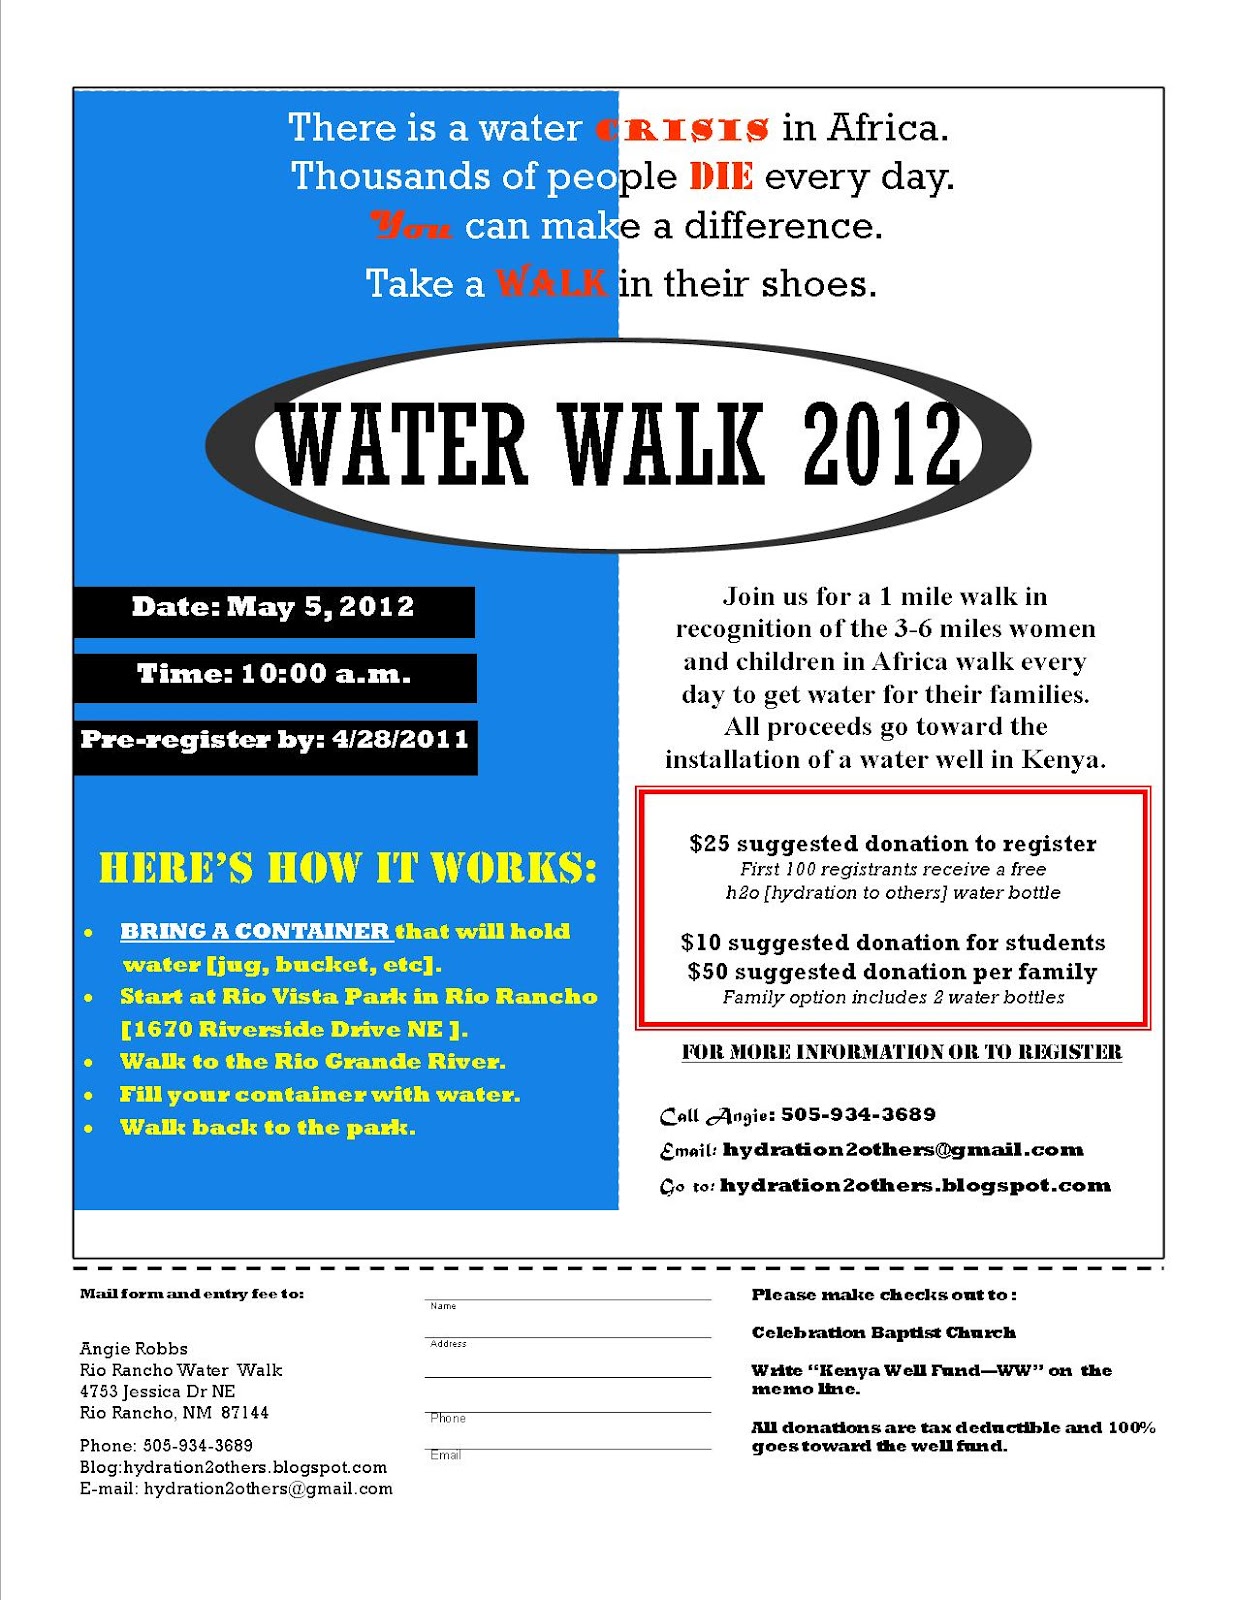 h20-hydration-2-others-rio-rancho-water-walk